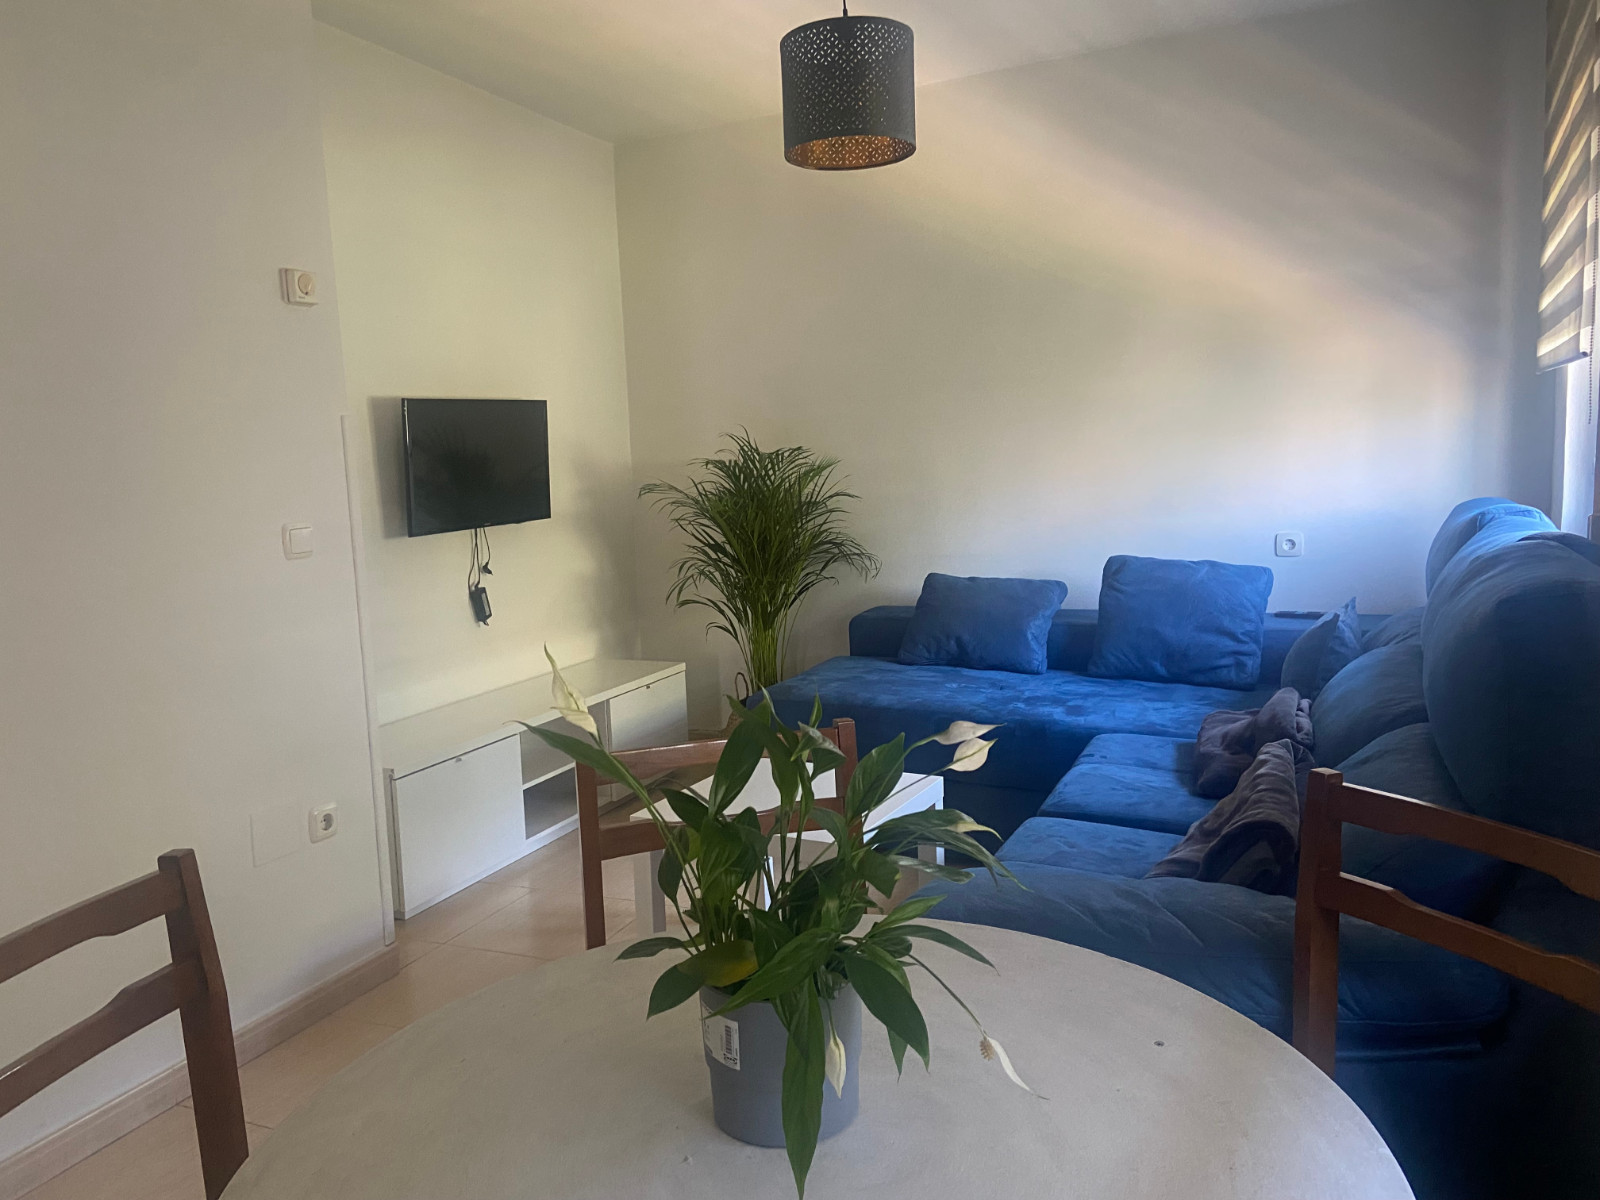 Flat for rent in Vadillos, Valladolid